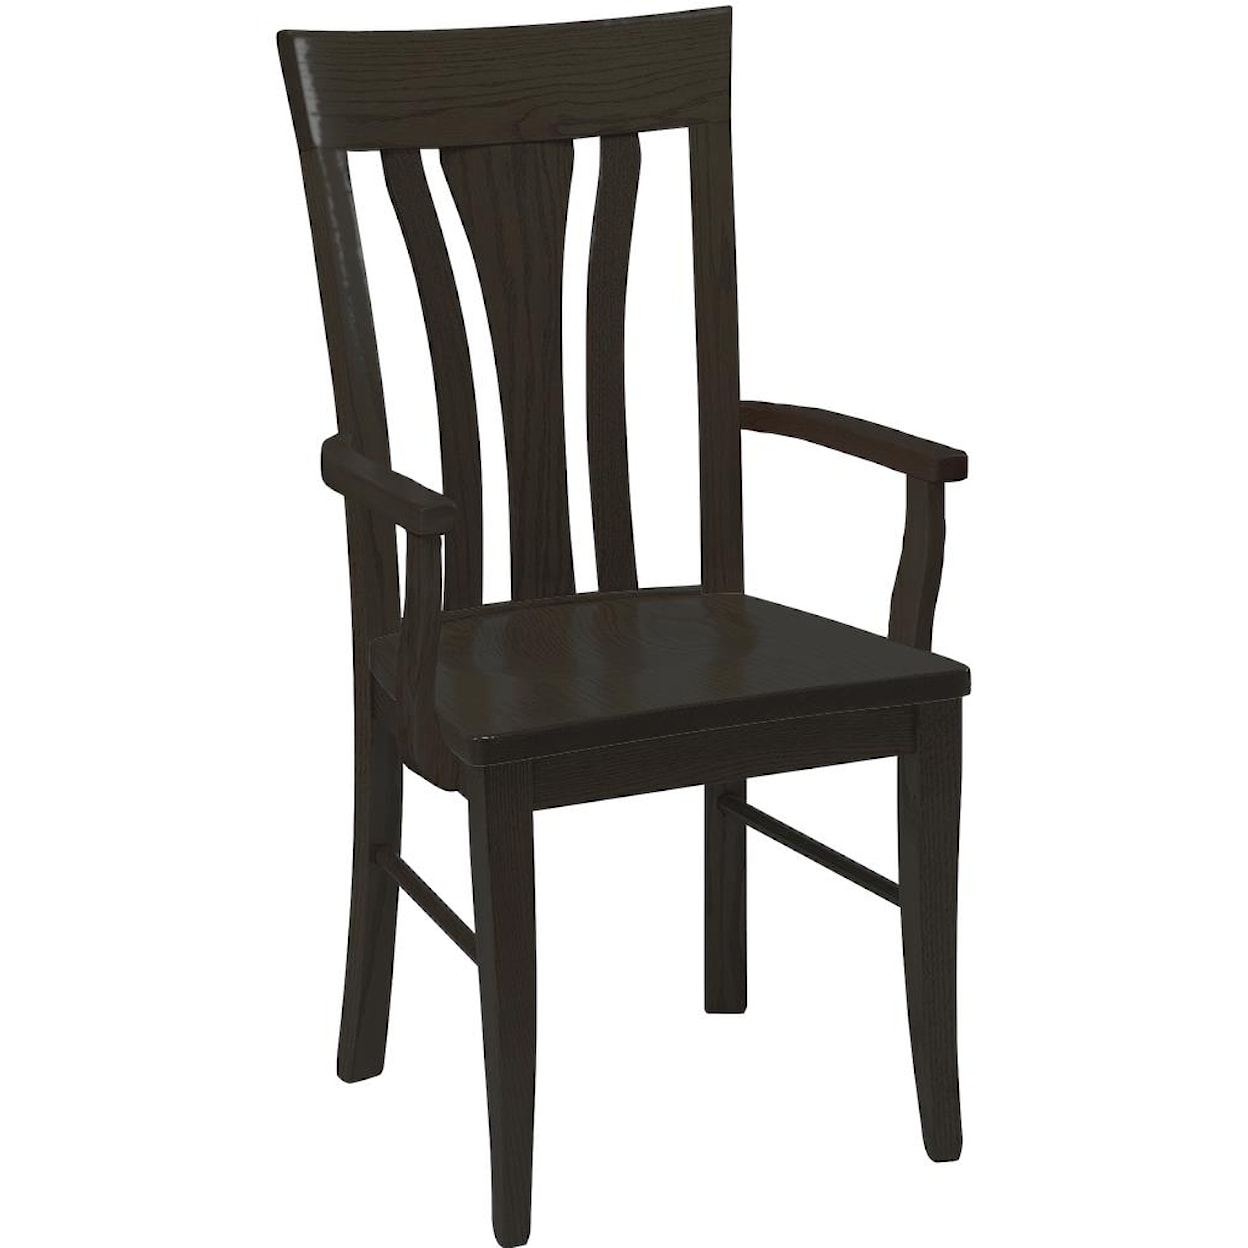 Daniel's Amish Chairs and Barstools Tulip Arm Chair